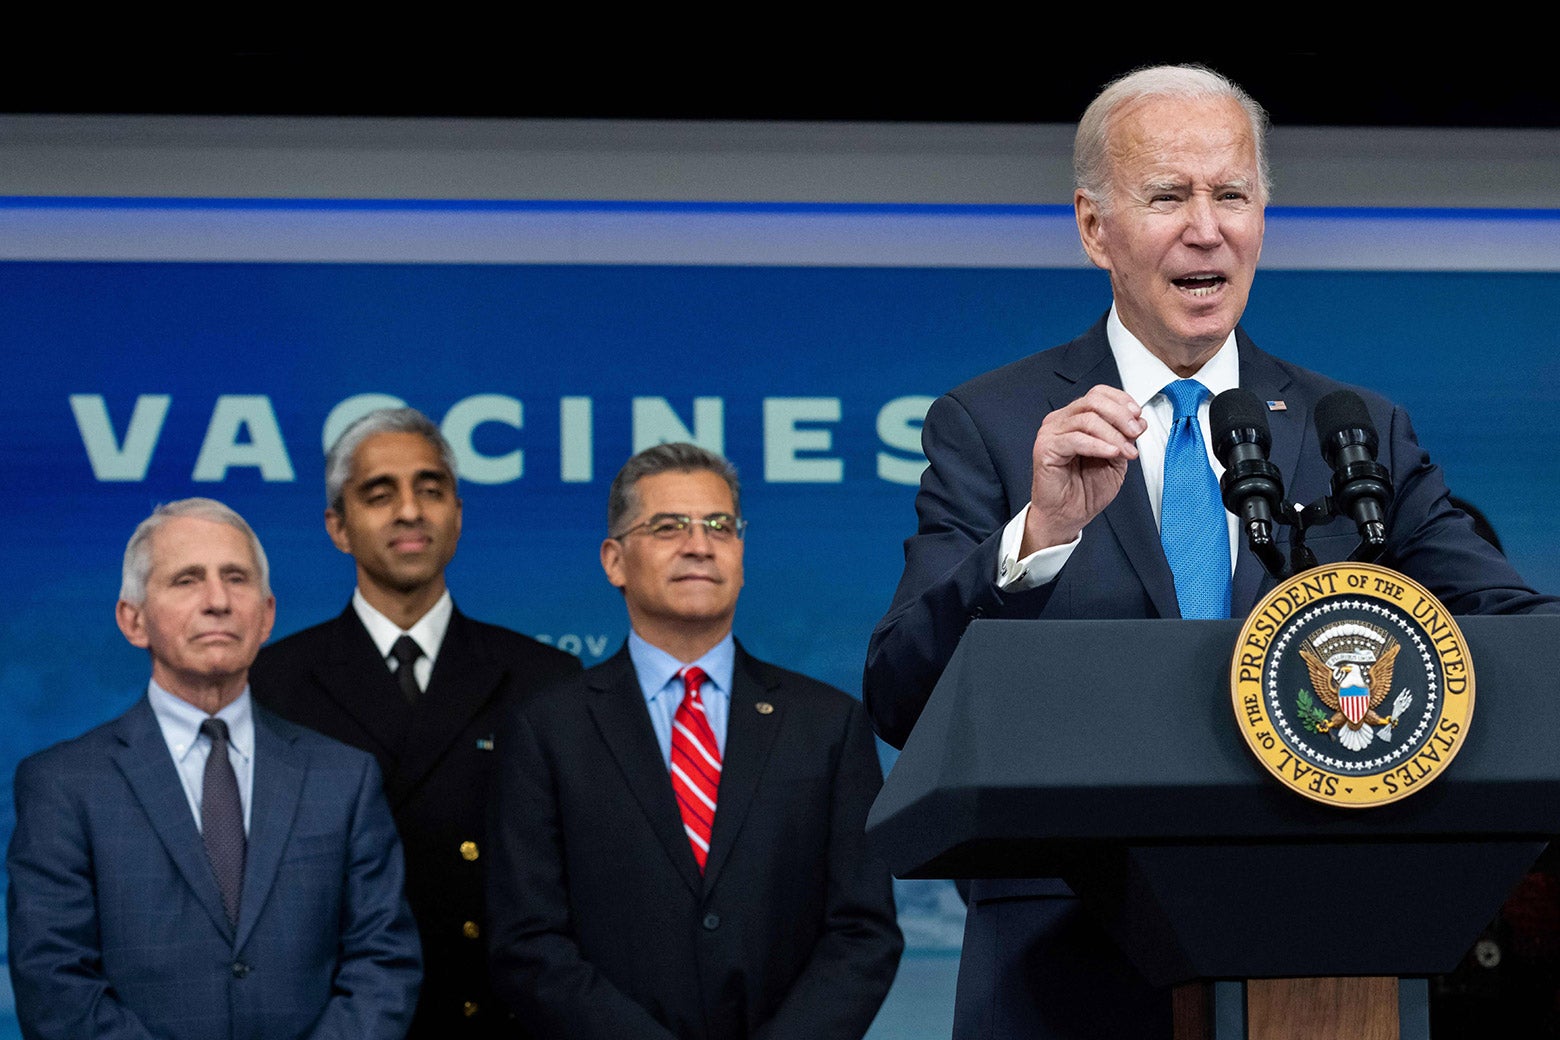 Joe Biden speaking at a podium with POTUS seal as three administration officials look on behind him.